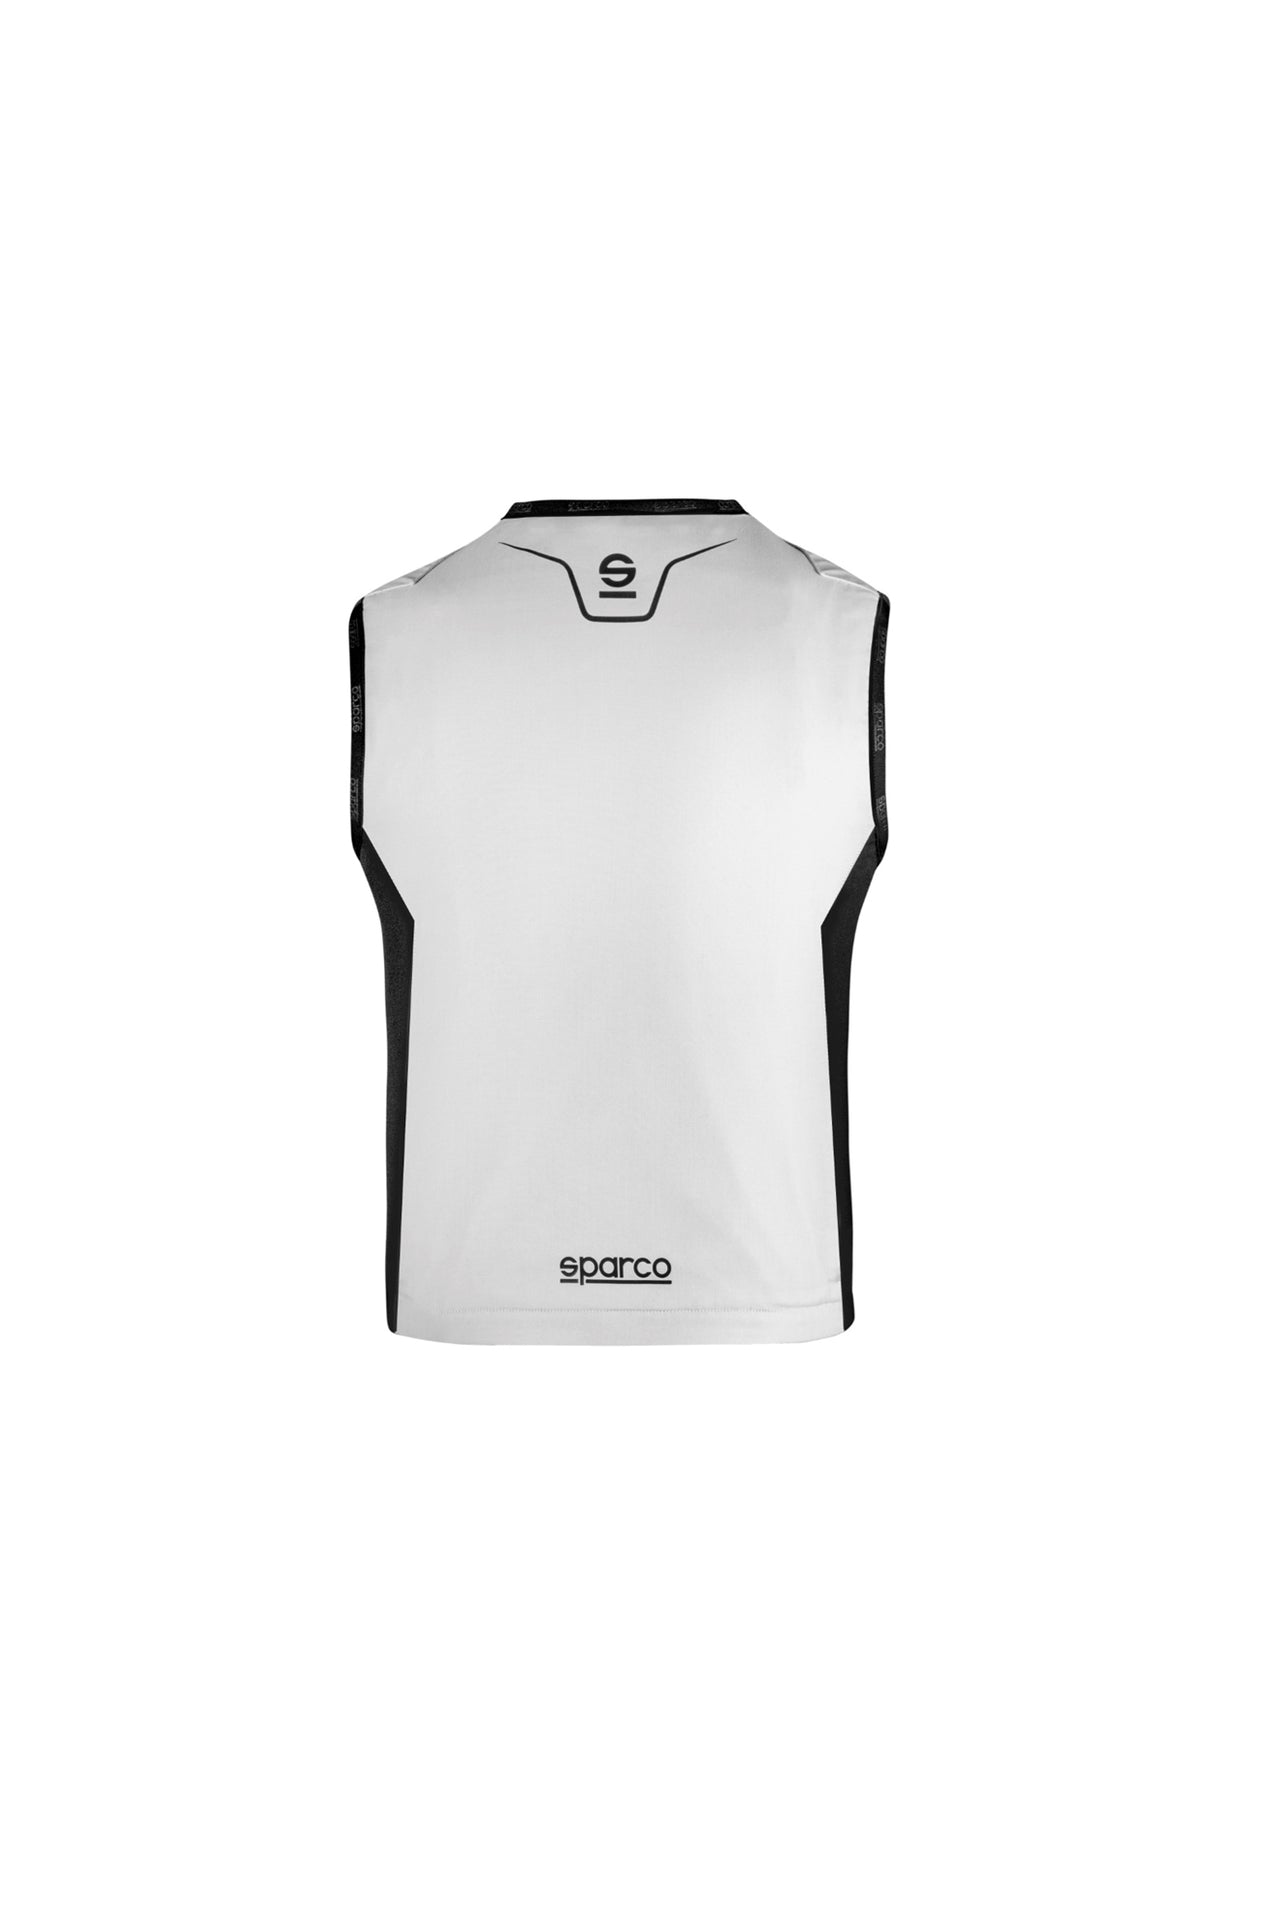 Sparco Ice Vest 001014SI Driver Cooling Back View